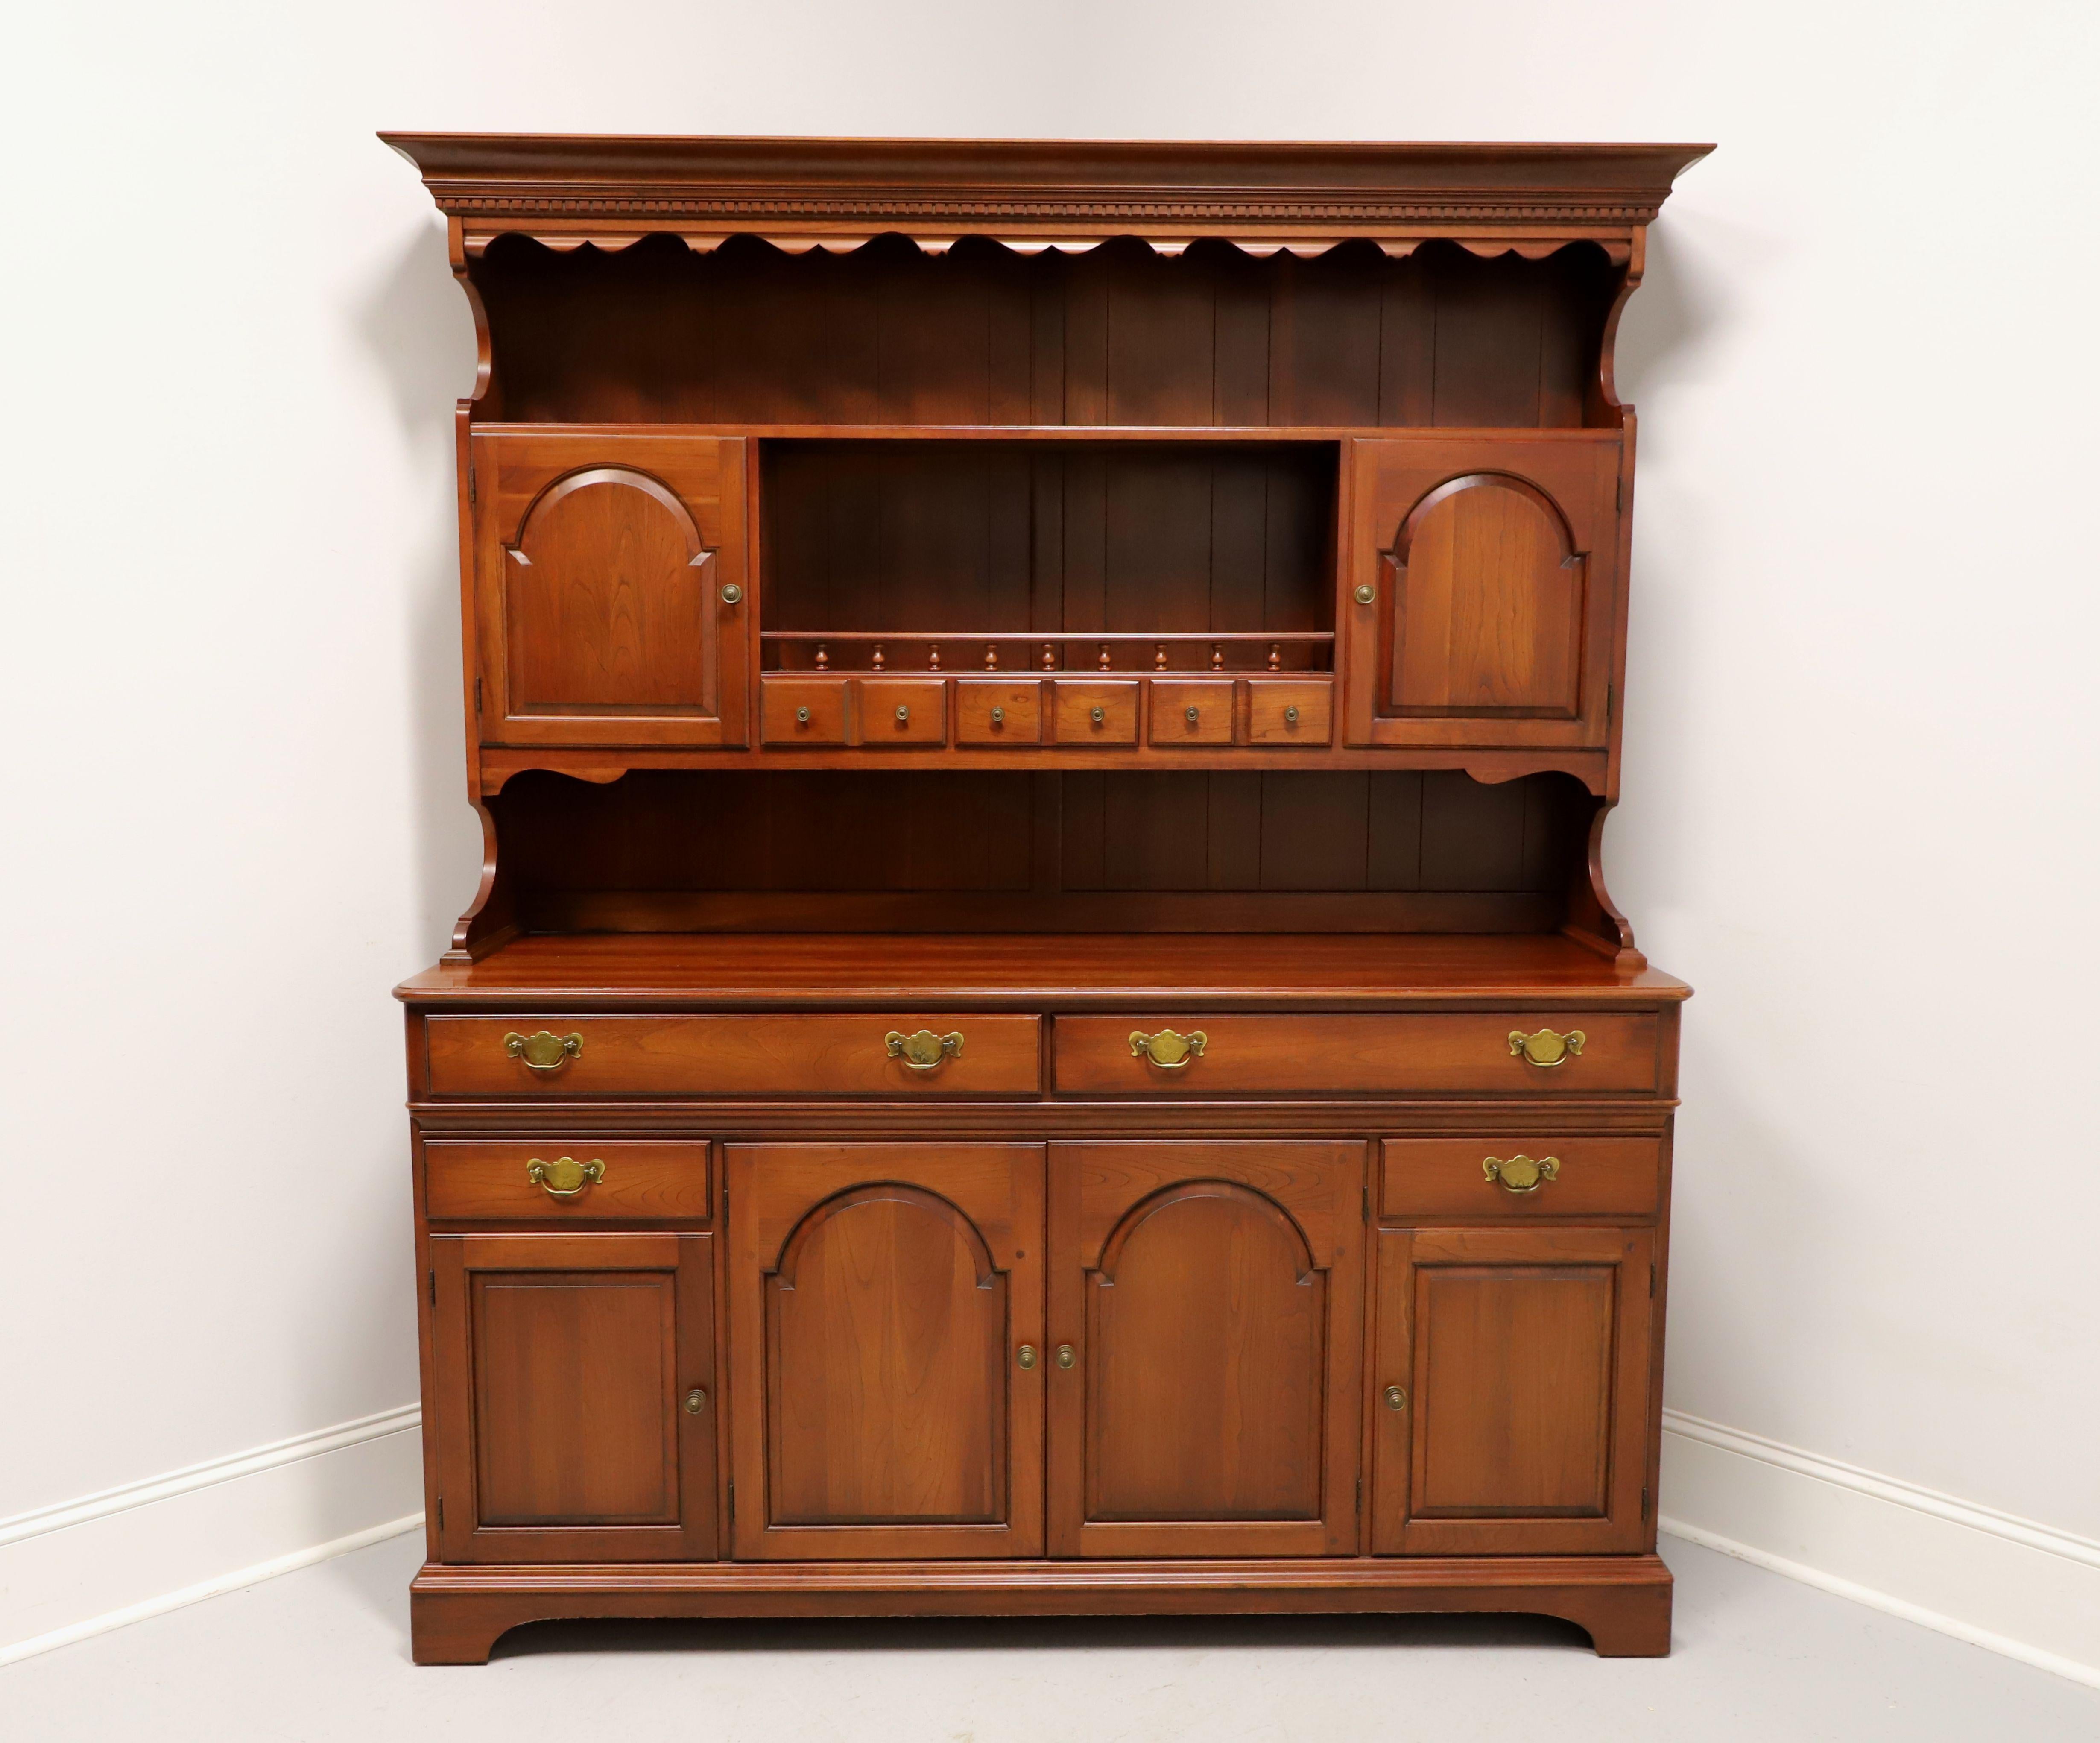 A Colonial style farmhouse hutch by Pennsylvania House. Solid cherry wood with their Candlelight finish, brass hardware, crown & dentil molding to top, carved sides to top section, bevel edge to top of lower cabinet, and bracket feet. Upper cabinet